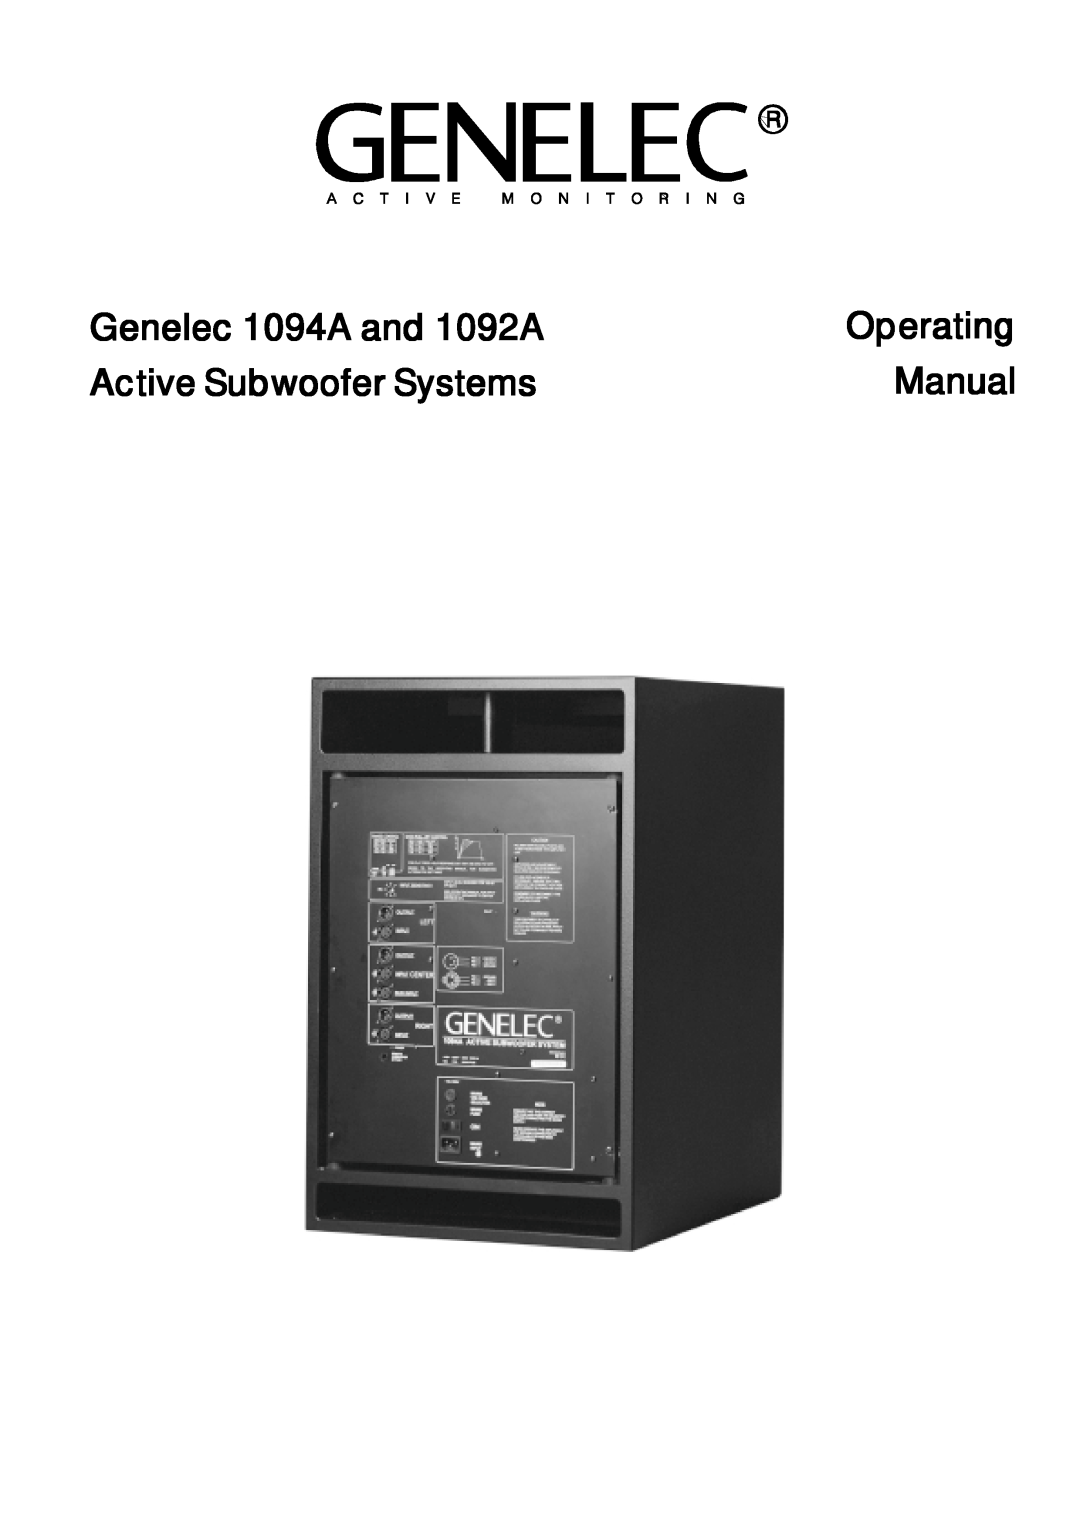 Genelec manual Genelec 1094A and 1092A, Active Subwoofer Systems, Manual, Operating 